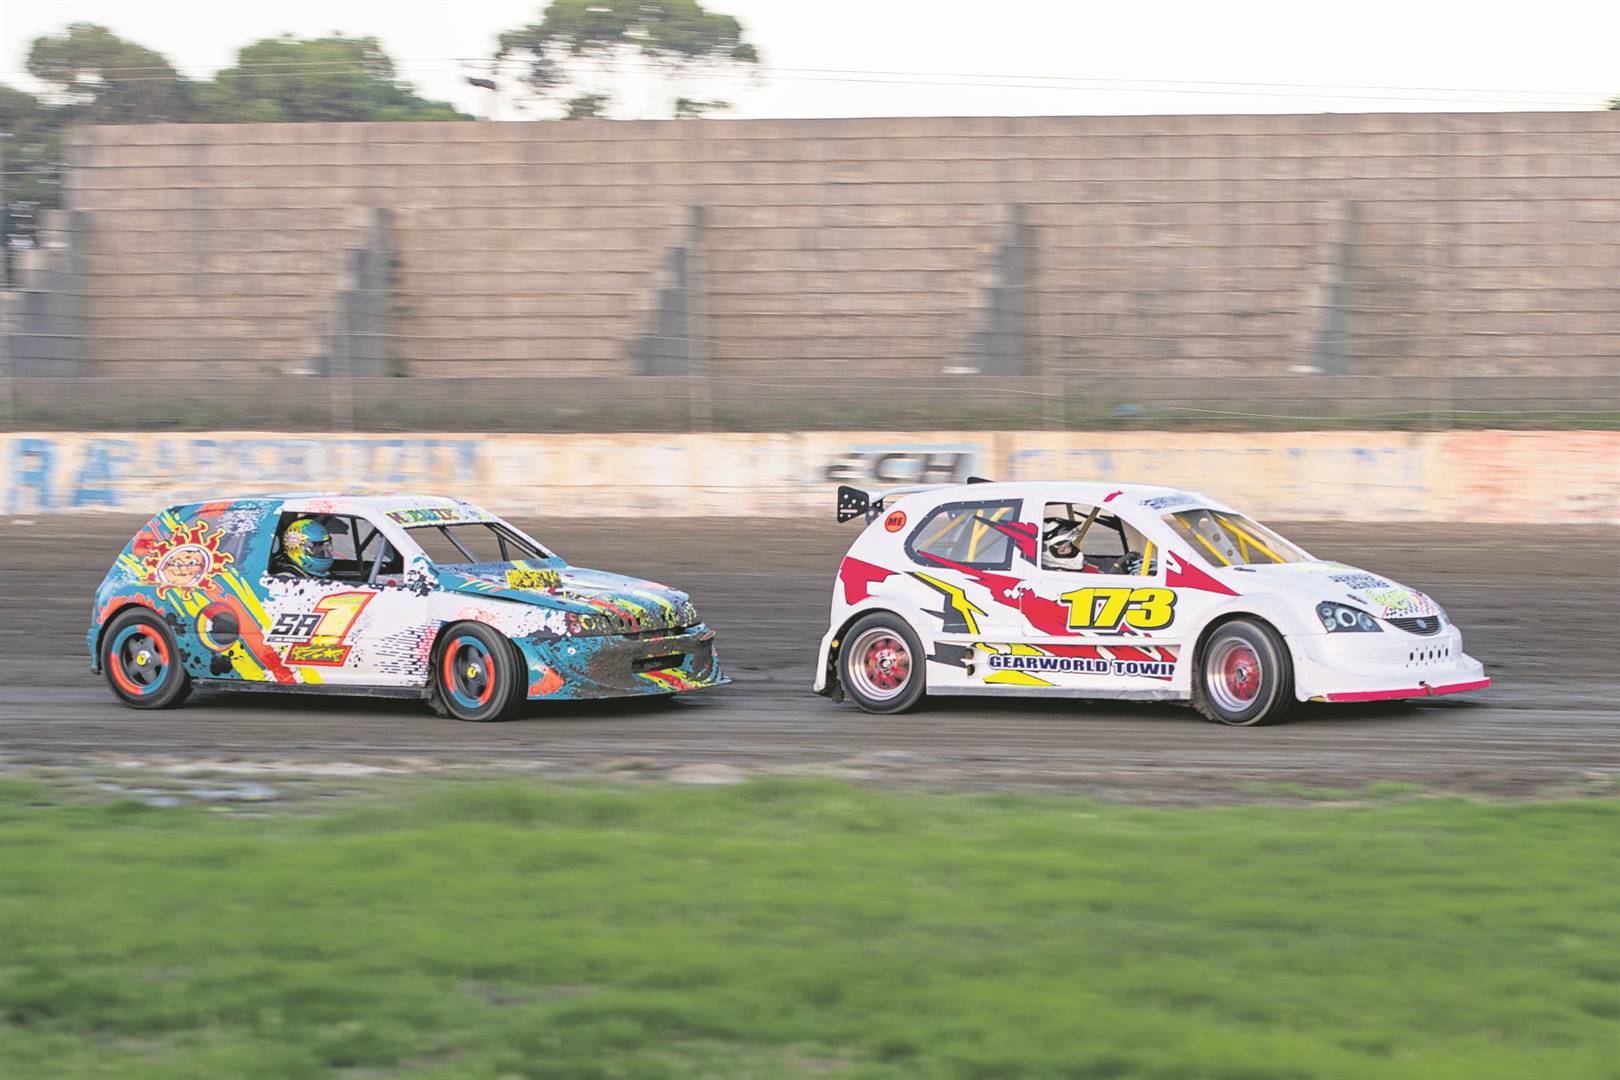 Victory Raceway’s next event will take place on February 17, and will be the first round of the regional and second round of club, championships. Gates will open at 13:00 and racing will start at 18:00 at Victory Raceway in Walmer. Tickets are R60 for adults, R30 for children under 12, and R50 per vehicle for track parking. Classes competing include Rookies, 1600 Saloons, 1660’s, 2.1 Modifieds, Heavy Metals, and American Saloons. A variety of food stalls will be available. For more information contact Maggie at 082 656 8830. Pictured are SA1, Marthinus Muller, and E173, Chanell van Tonder, in the 1660 class.                                 